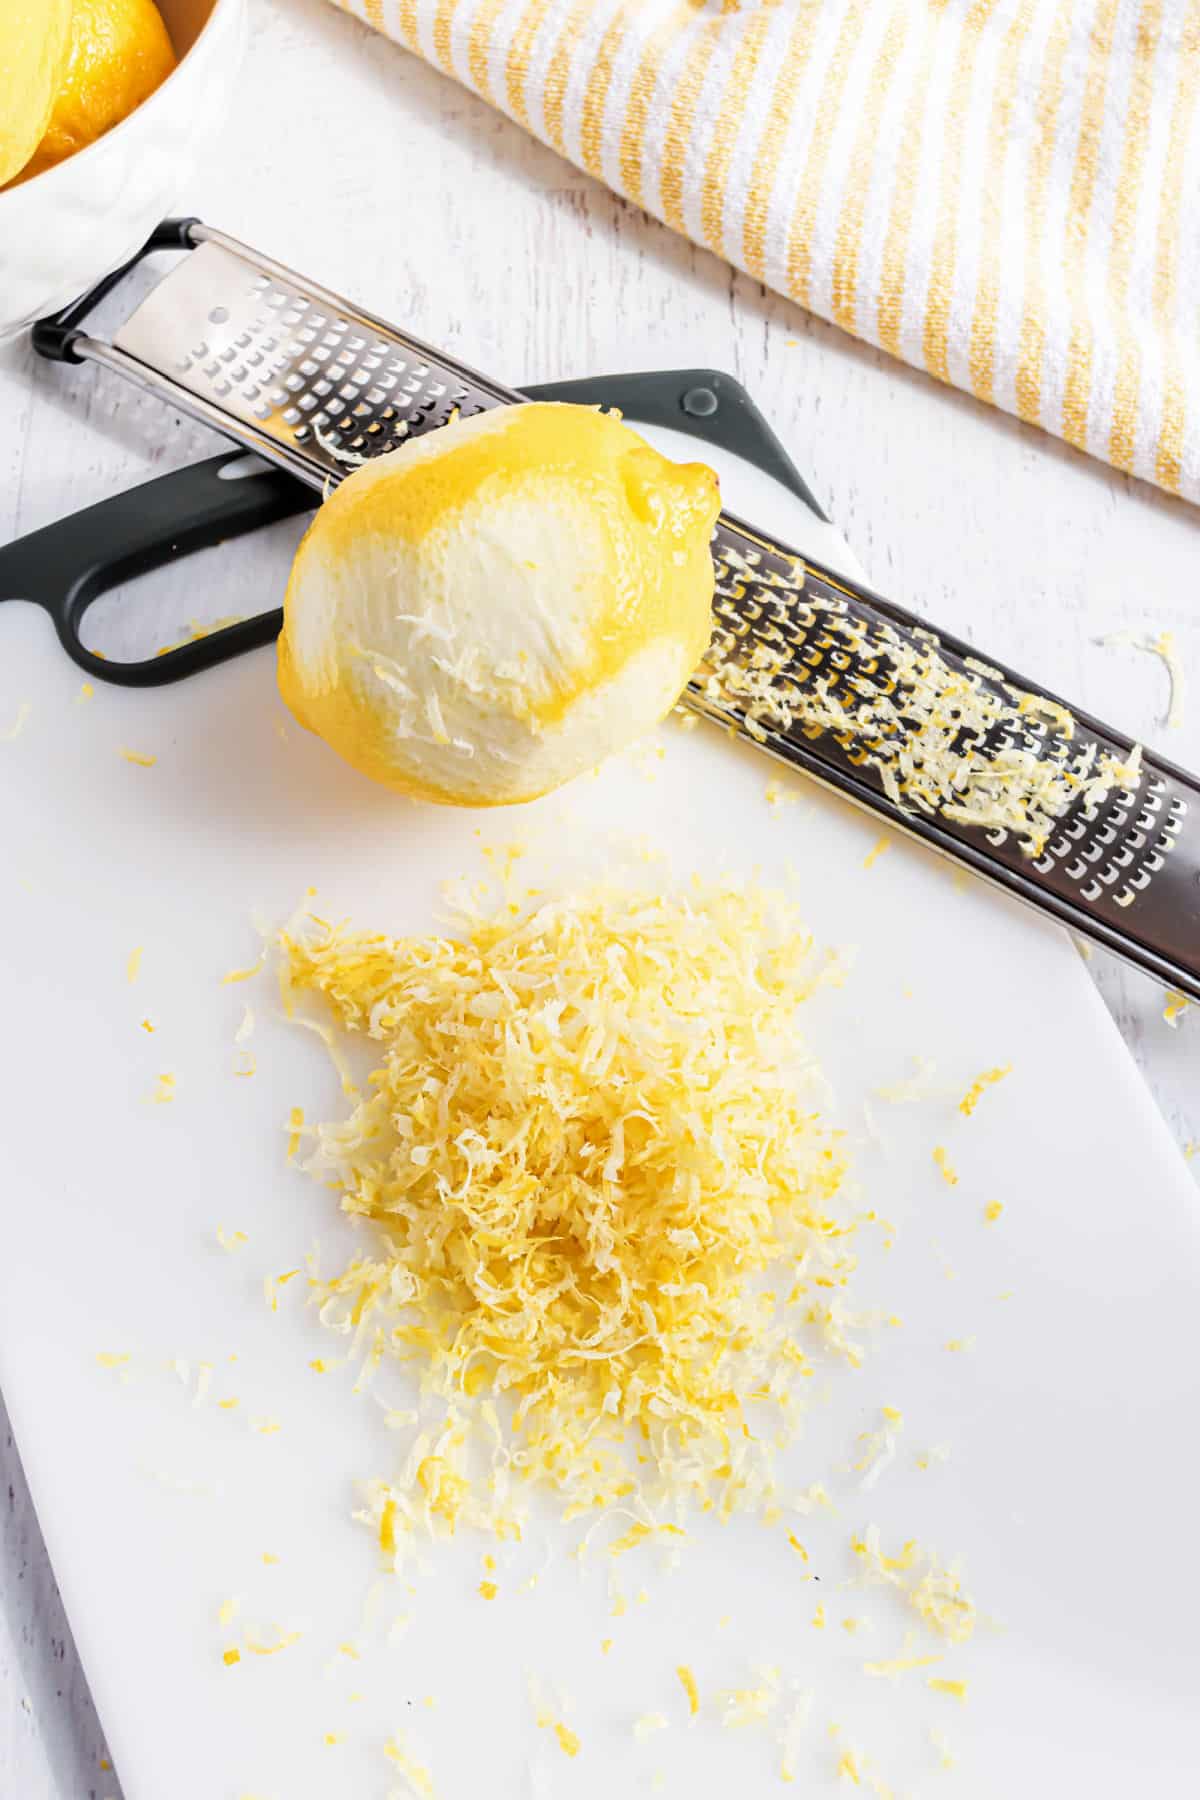 Lemon zested with a microplane grater.